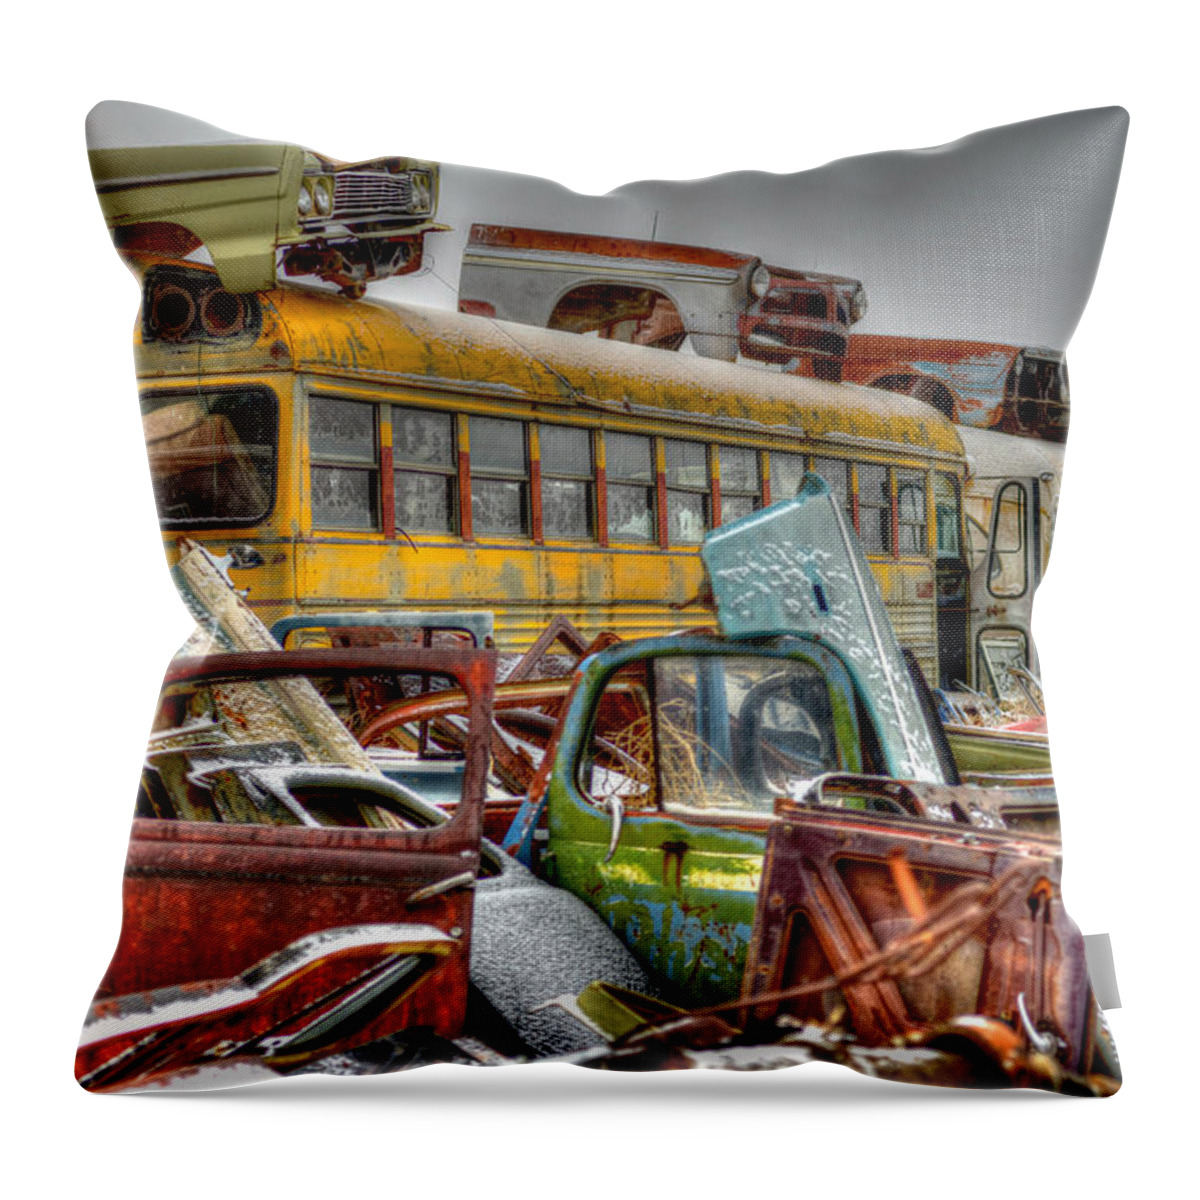 Salvage Yard Throw Pillow featuring the photograph School Bus by Craig Incardone